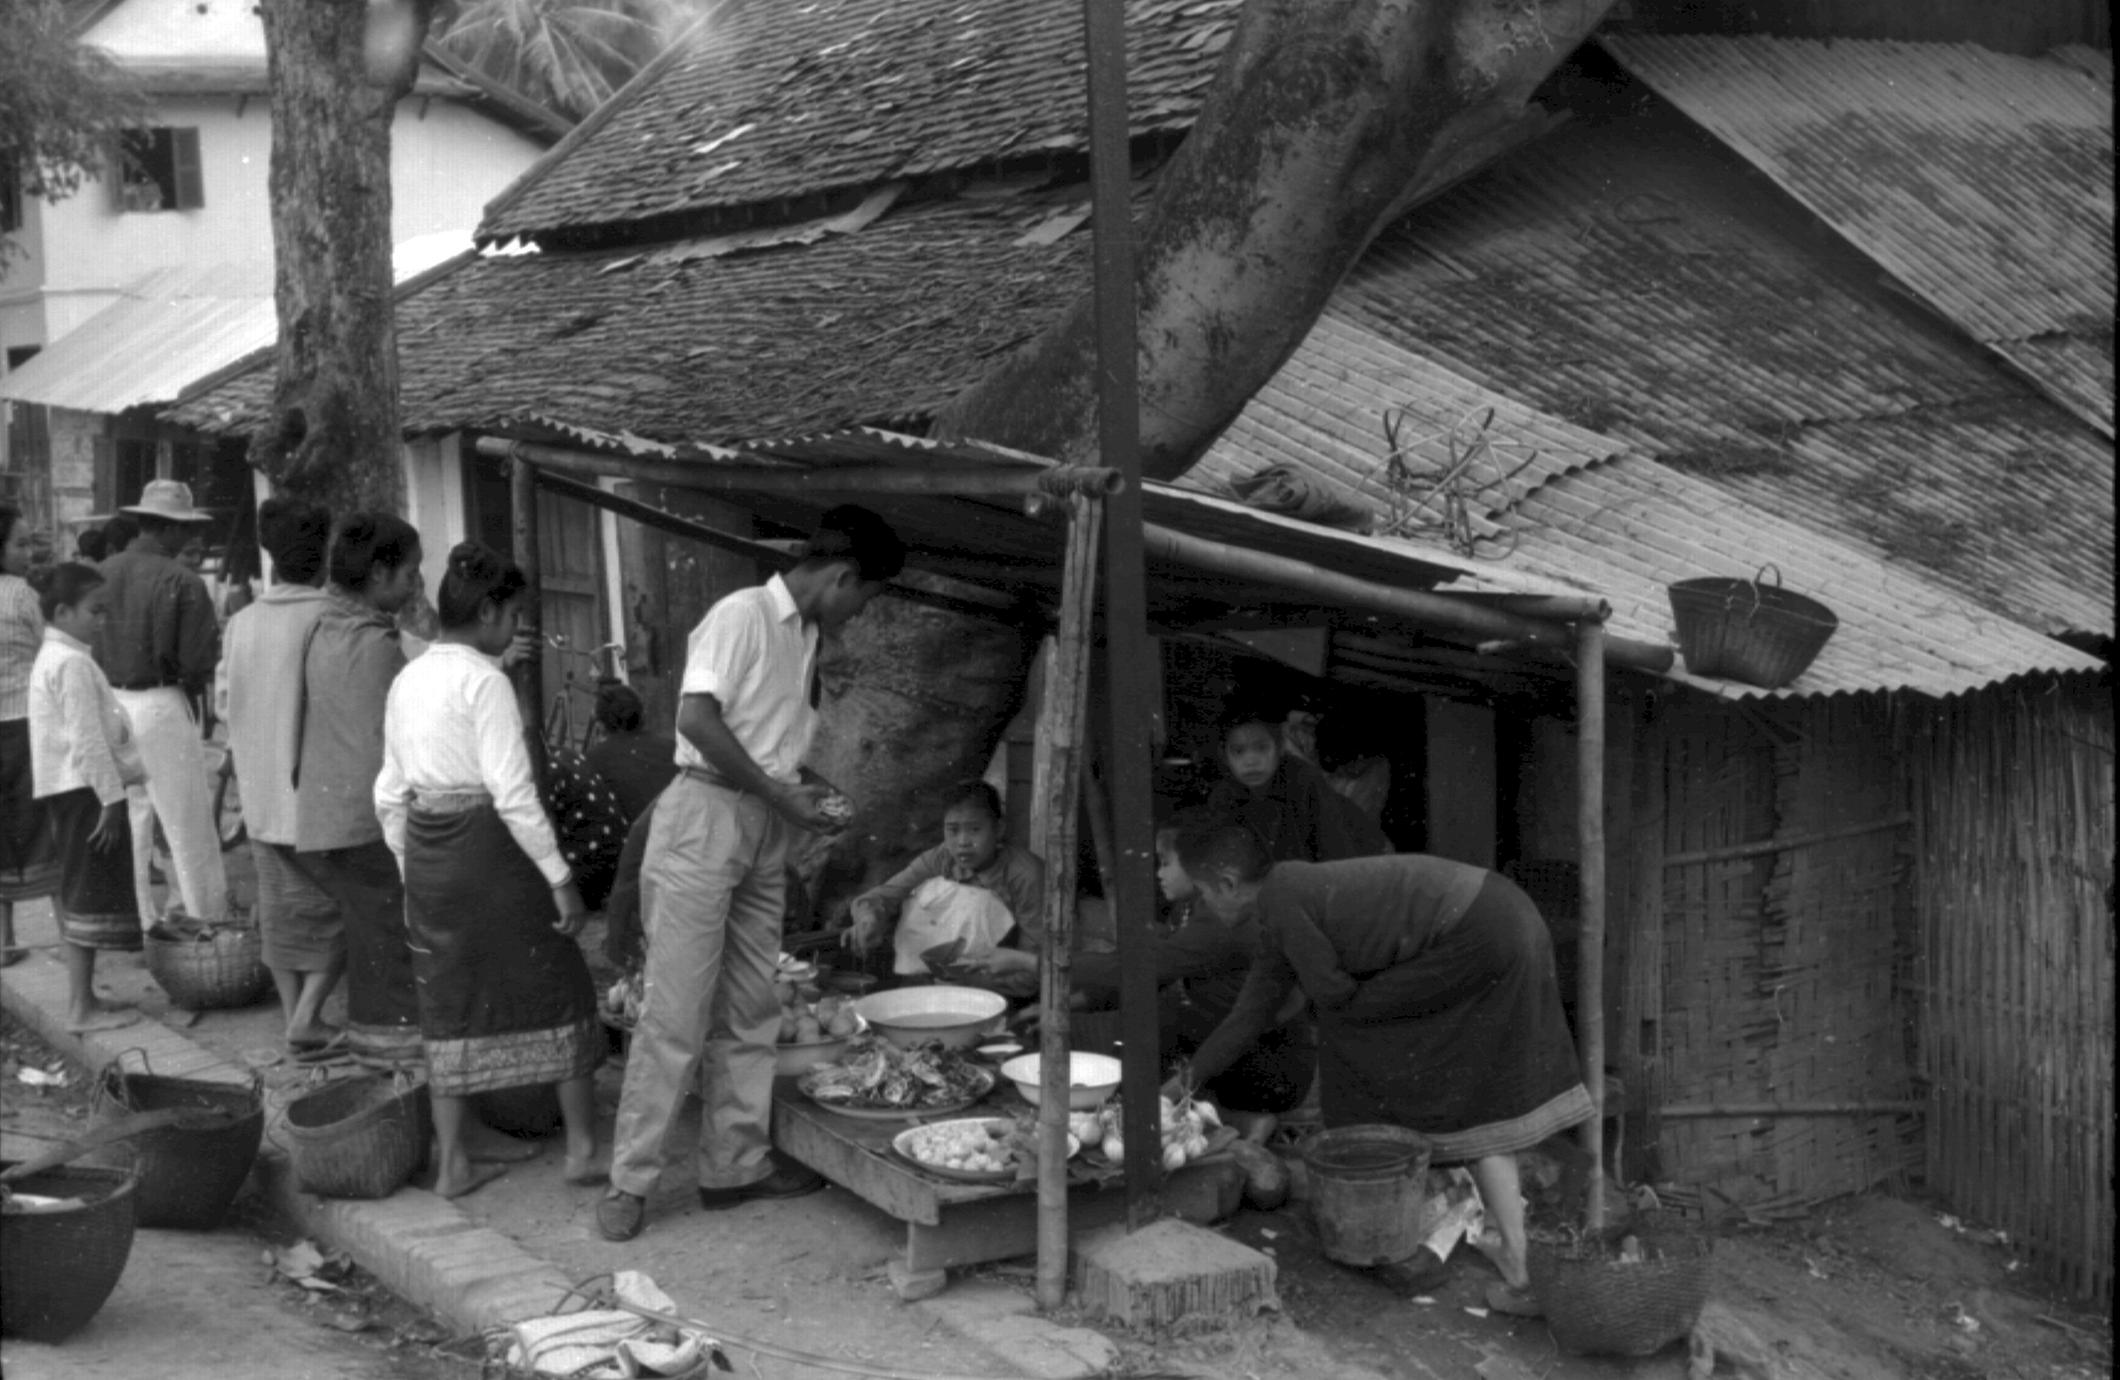 Lao women selling prepared food in shed